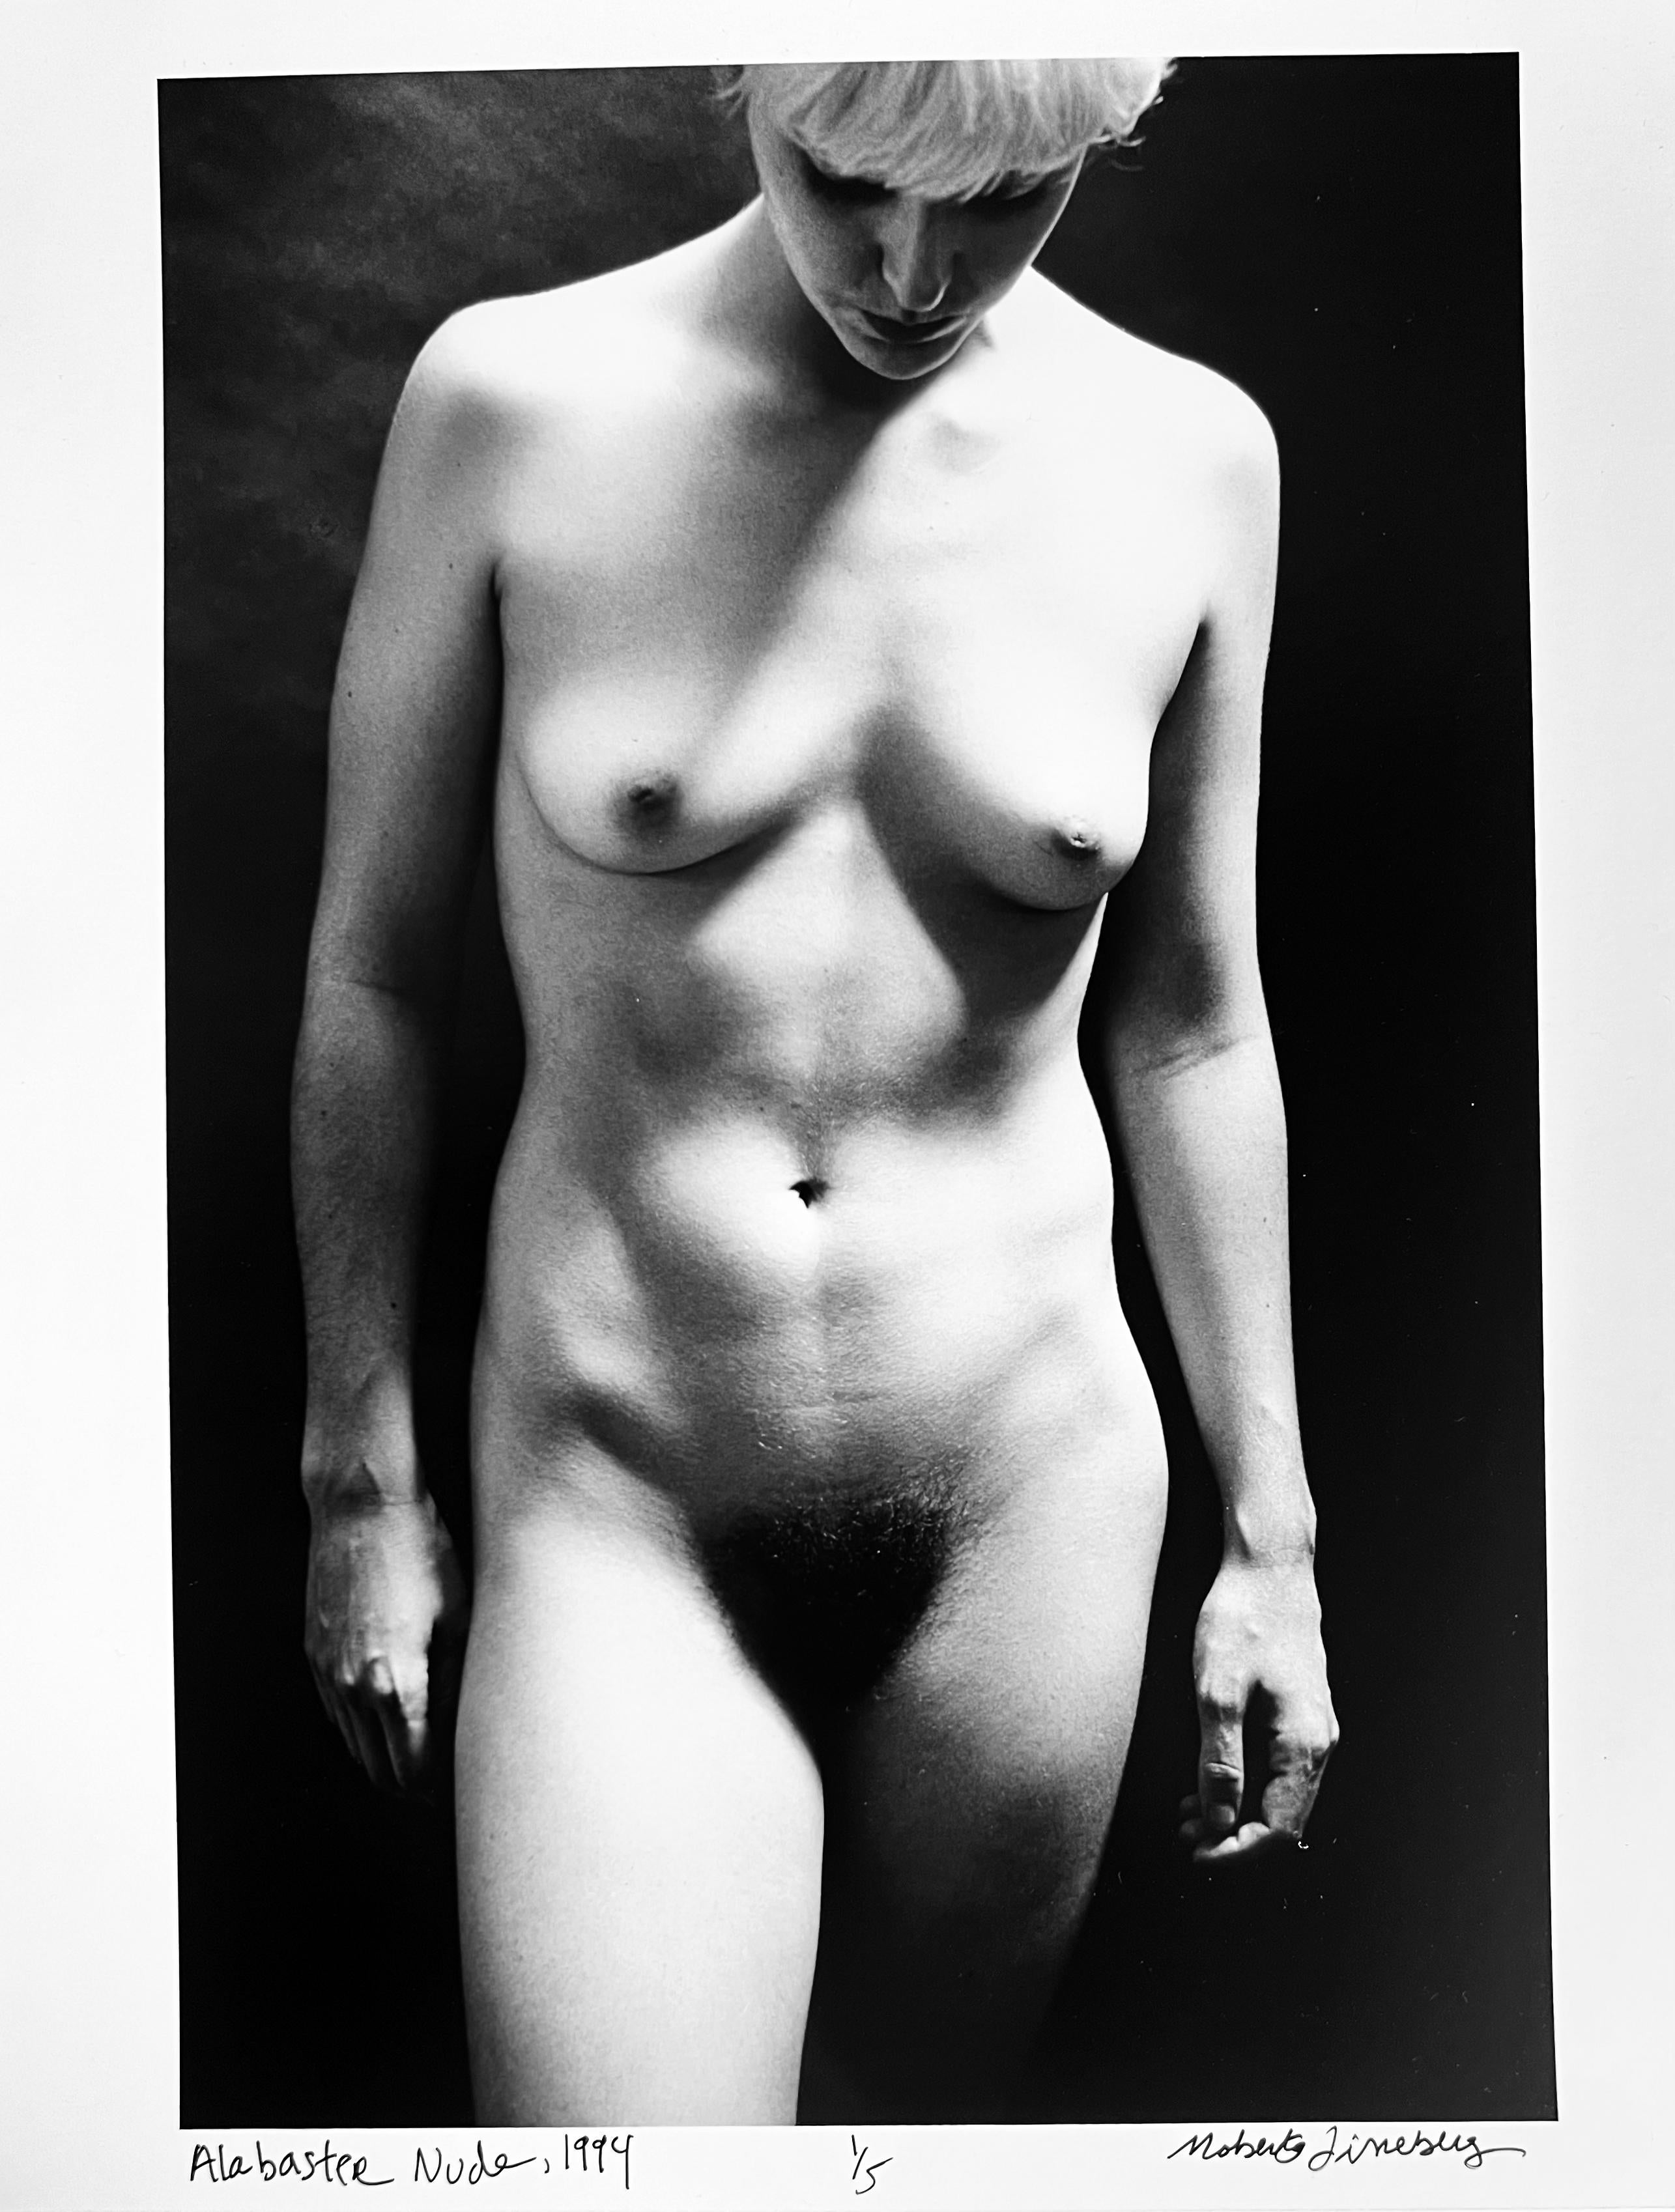 Alabaster Nude, New York, Black and White Photograph of  Female Nude in Studio